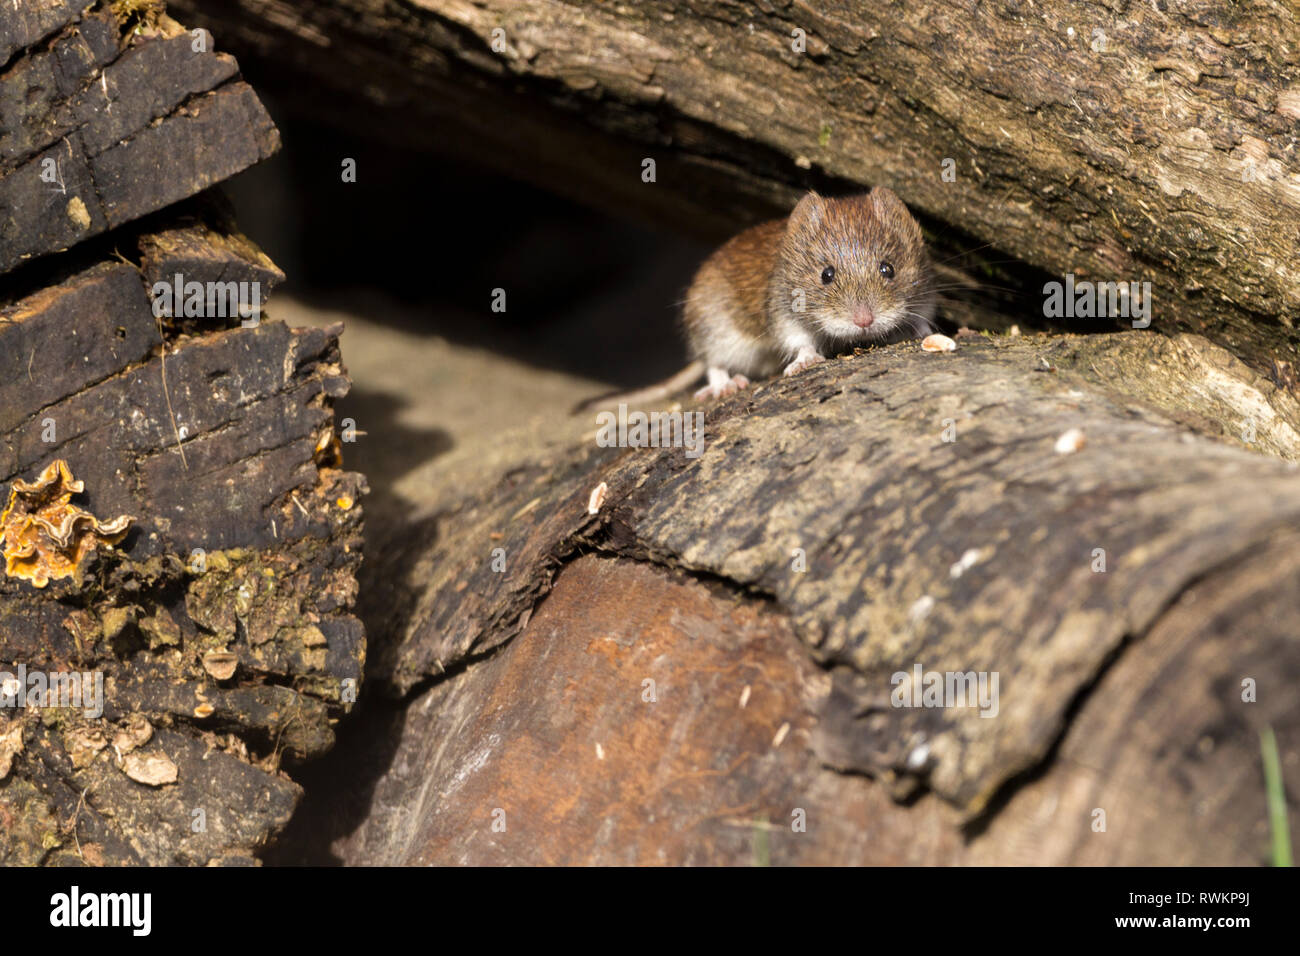 Vole bank (Myodes glareolus) red brown fur upper and creamy white underside small furry ears blunt nose short legs and tail. Small beady black eyes. Stock Photo